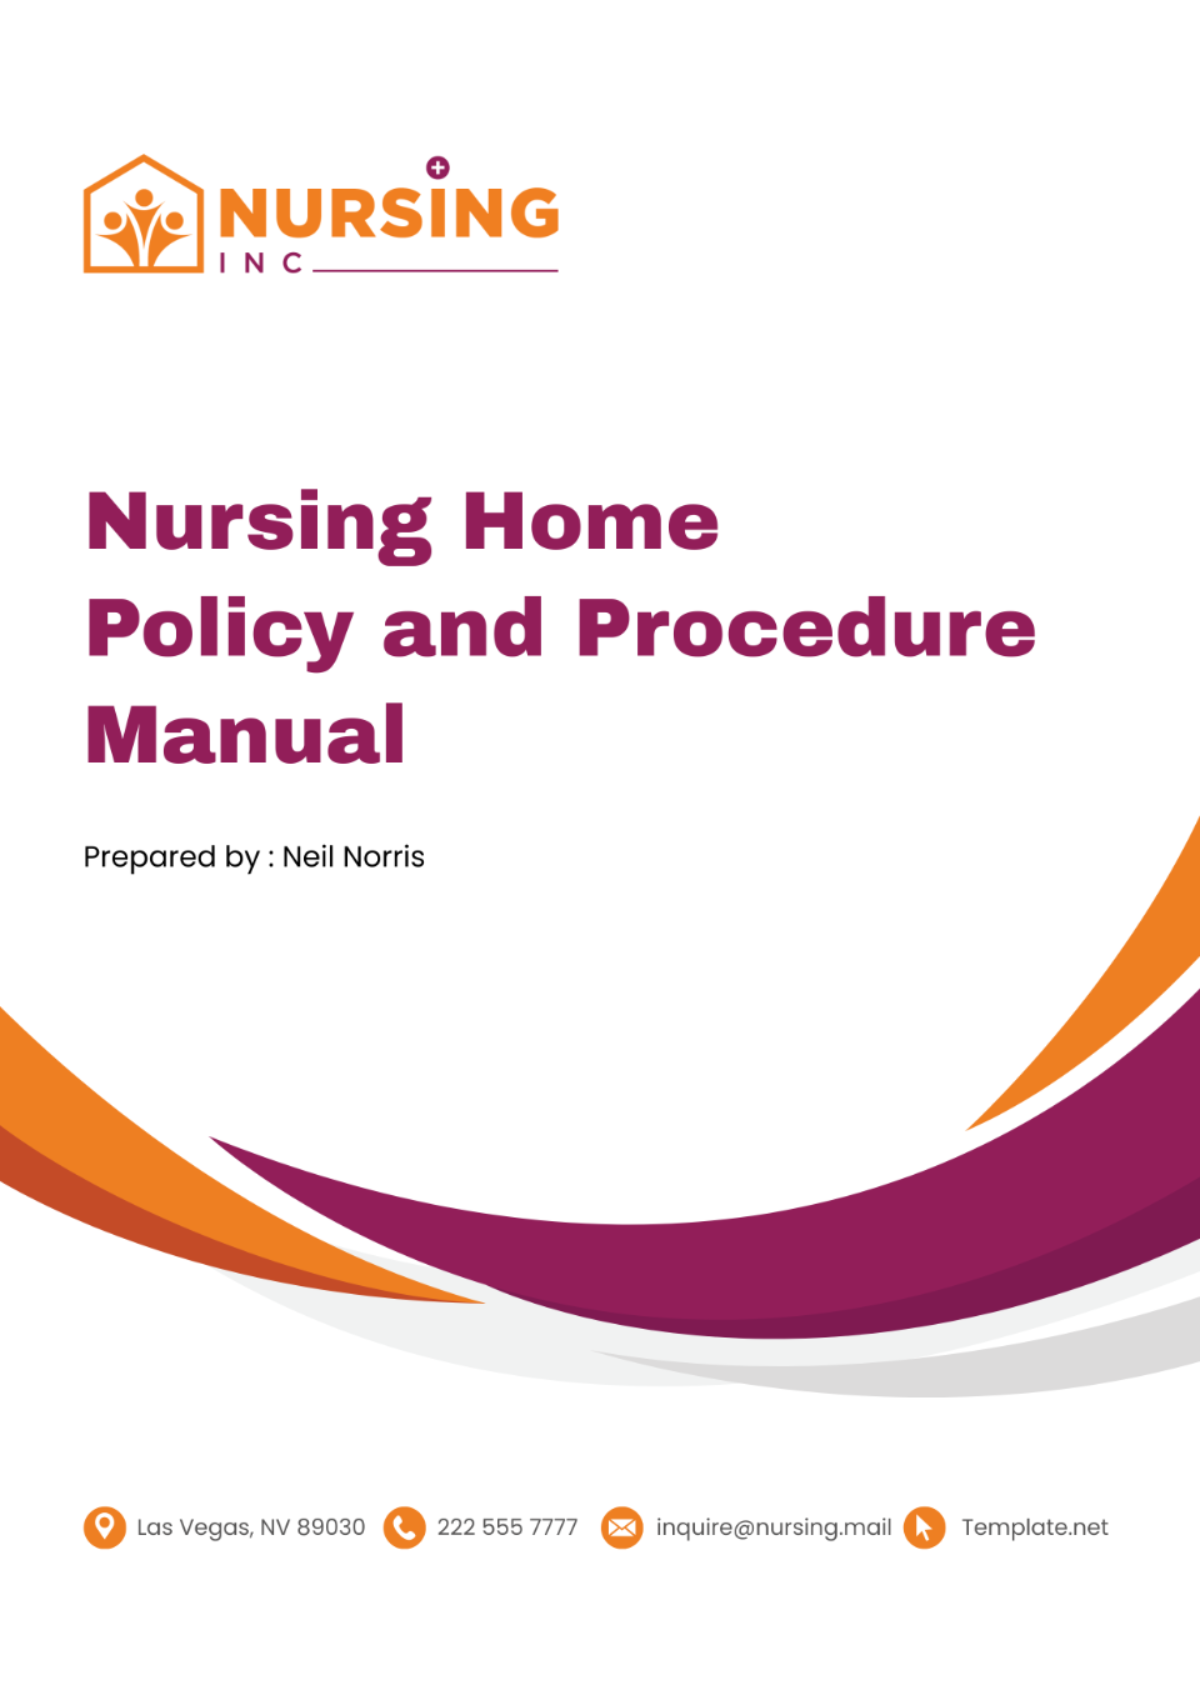 Nursing Home Policy and Procedure Manual Template